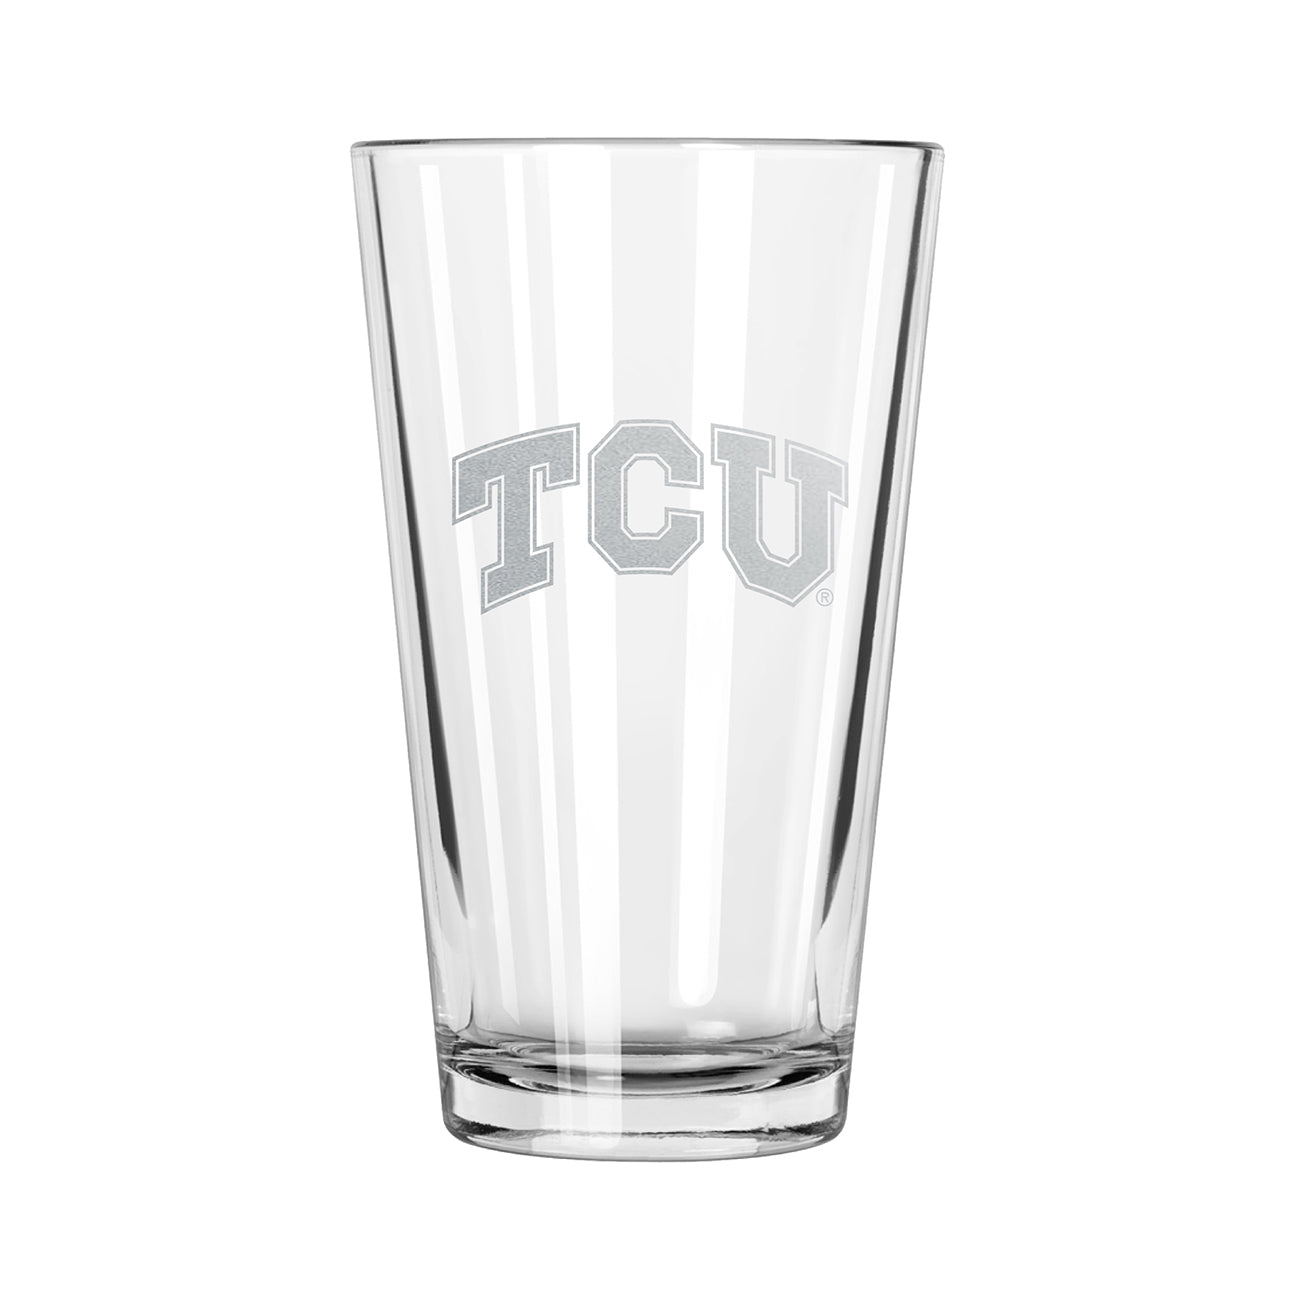 17oz Etched Pint Glass | Texas Christian University Horned Frogs
COL, CurrentProduct, Drinkware_category_All, TCU, Texas Christian University Horned Frogs
The Memory Company